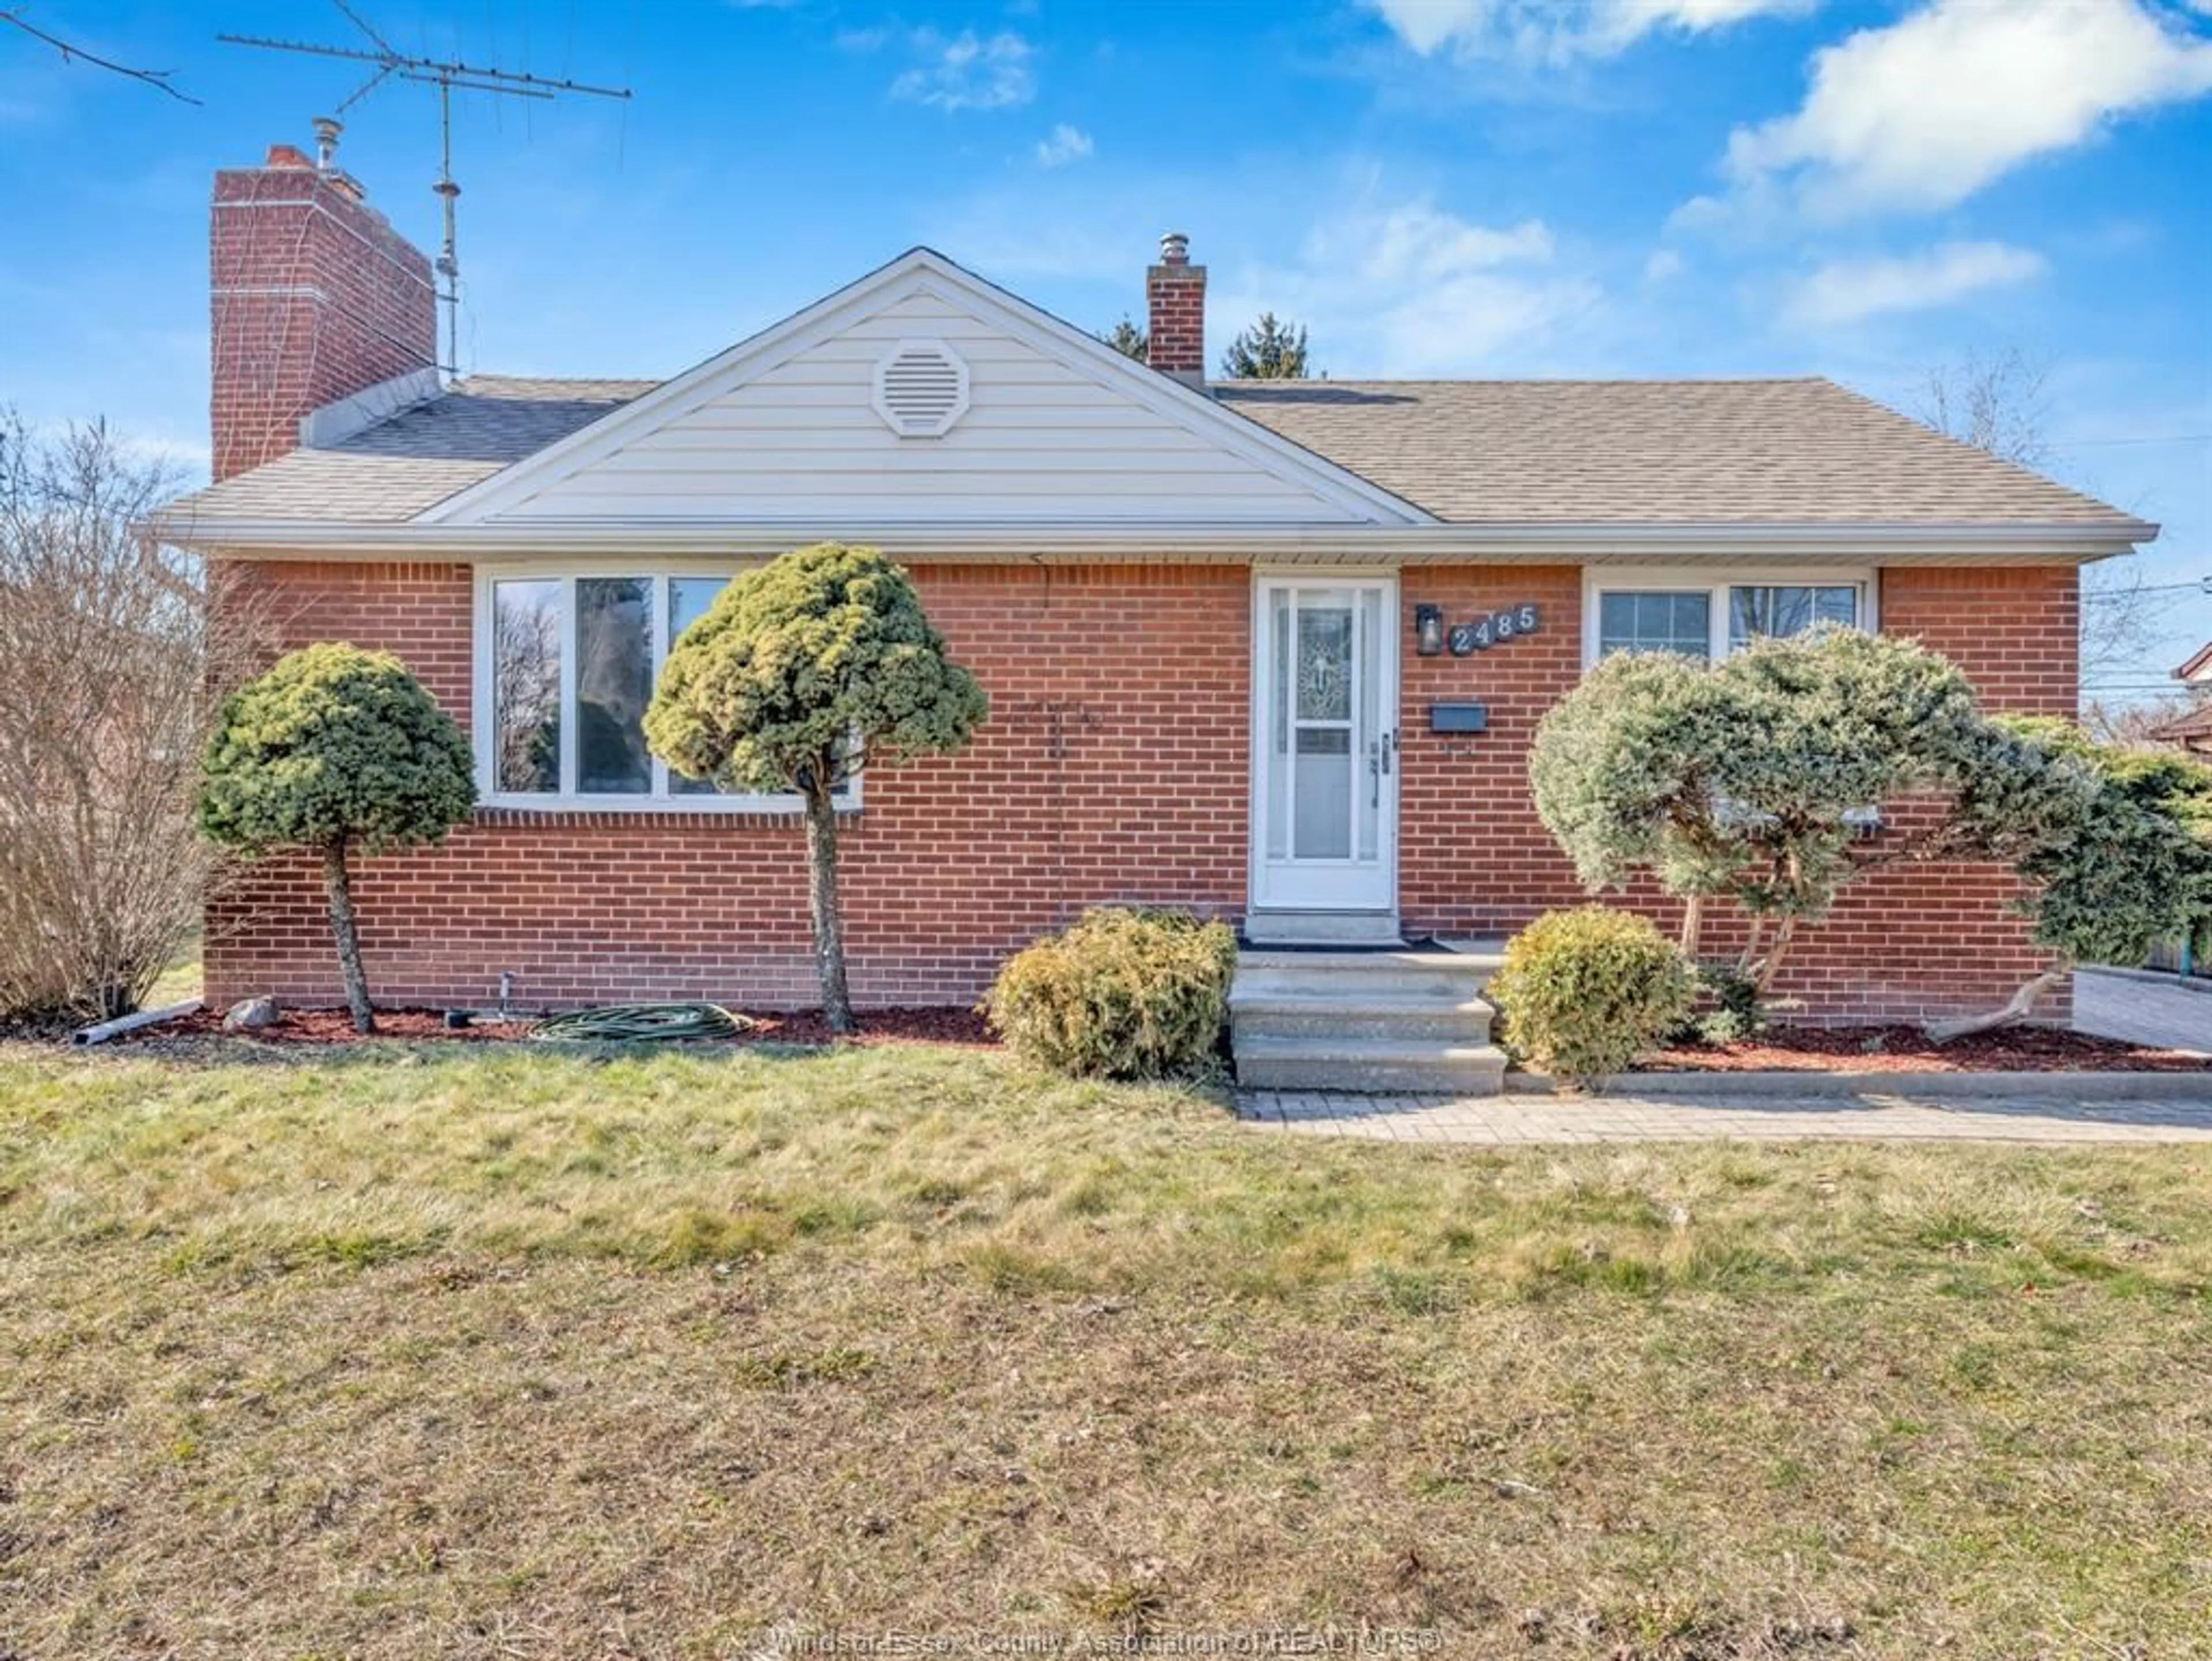 Home with brick exterior material for 2485 Dominion Blvd, Windsor Ontario N9E 2M5